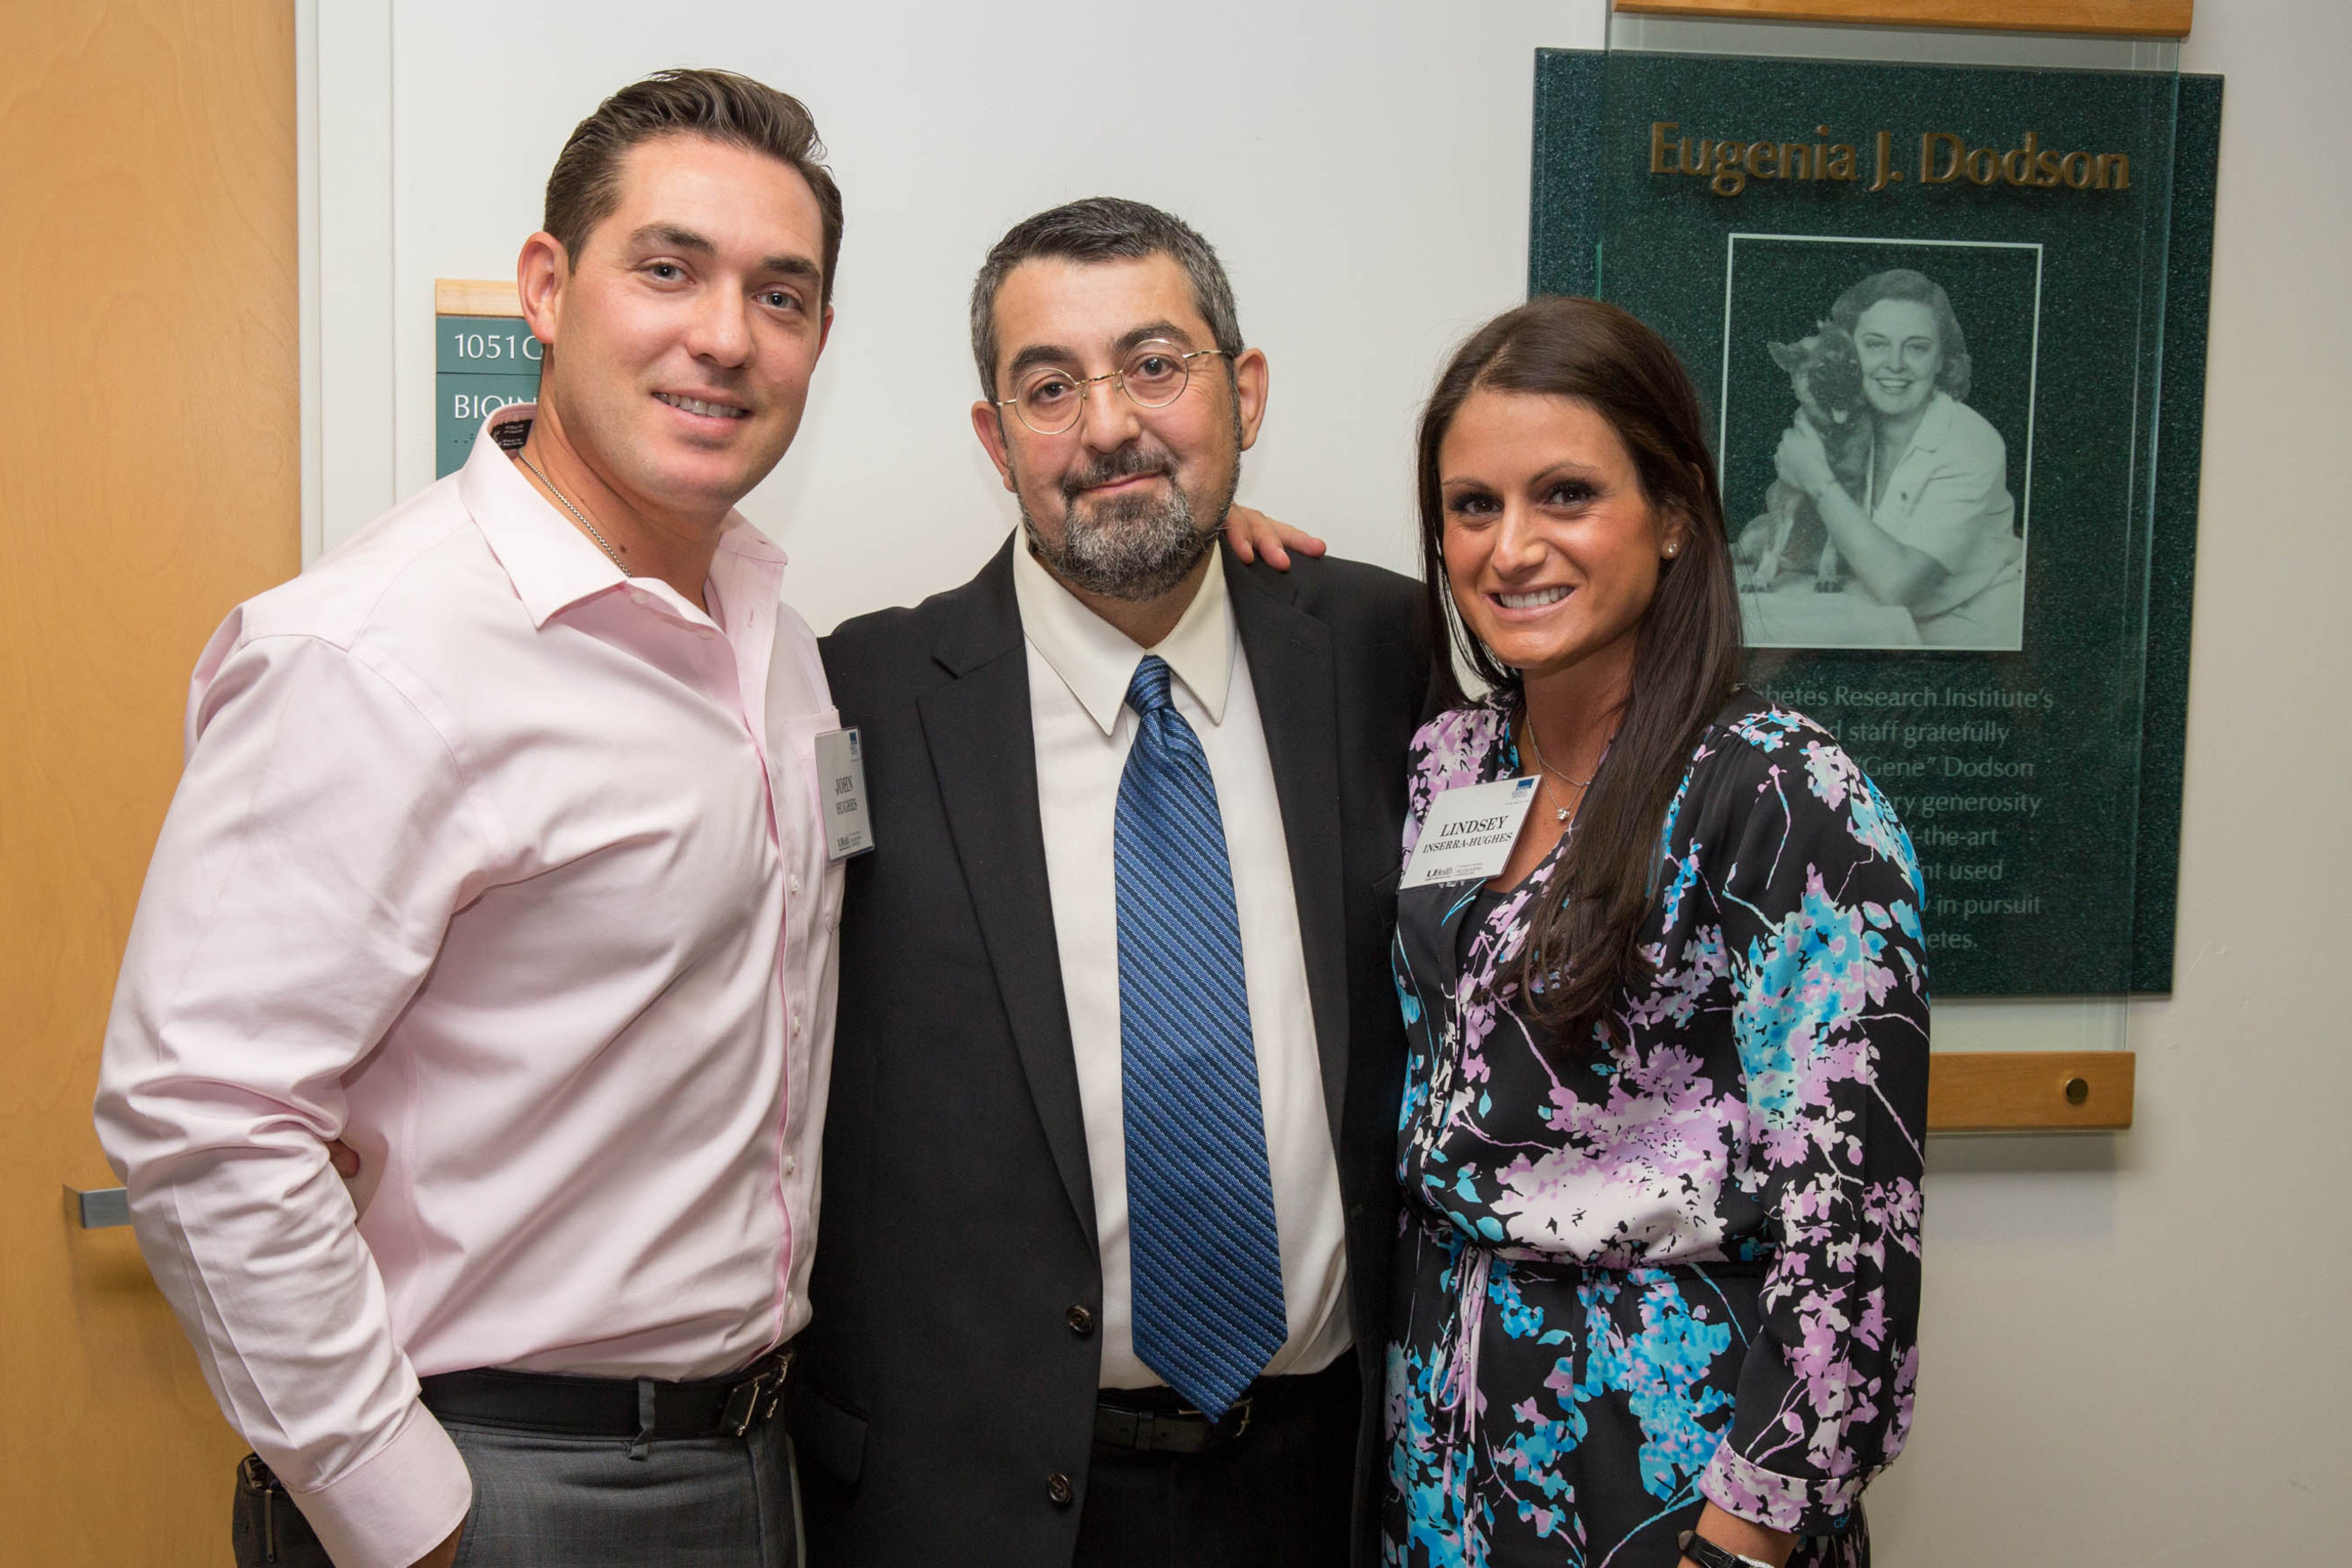 Immune Tolerance Leader Alberto Pugliese, M.D. (center) of the Diabetes Research Institute with John Hughes and Lindsey Inserra-Hughes, in front of a plaque with a photo of the late Eugenia Dodson.  Dr. Pugliese's specialty was highlighted throughout the day during the Lindsey Inserra-Hughes Immune Tolerance Seminar Series and the presentation of the J. Enloe and Eugenia J. Dodson Chair in Diabetes Research, which was held at the Diabetes Research Institute at the University of Miami Leonard M. Miller School of Medicine.